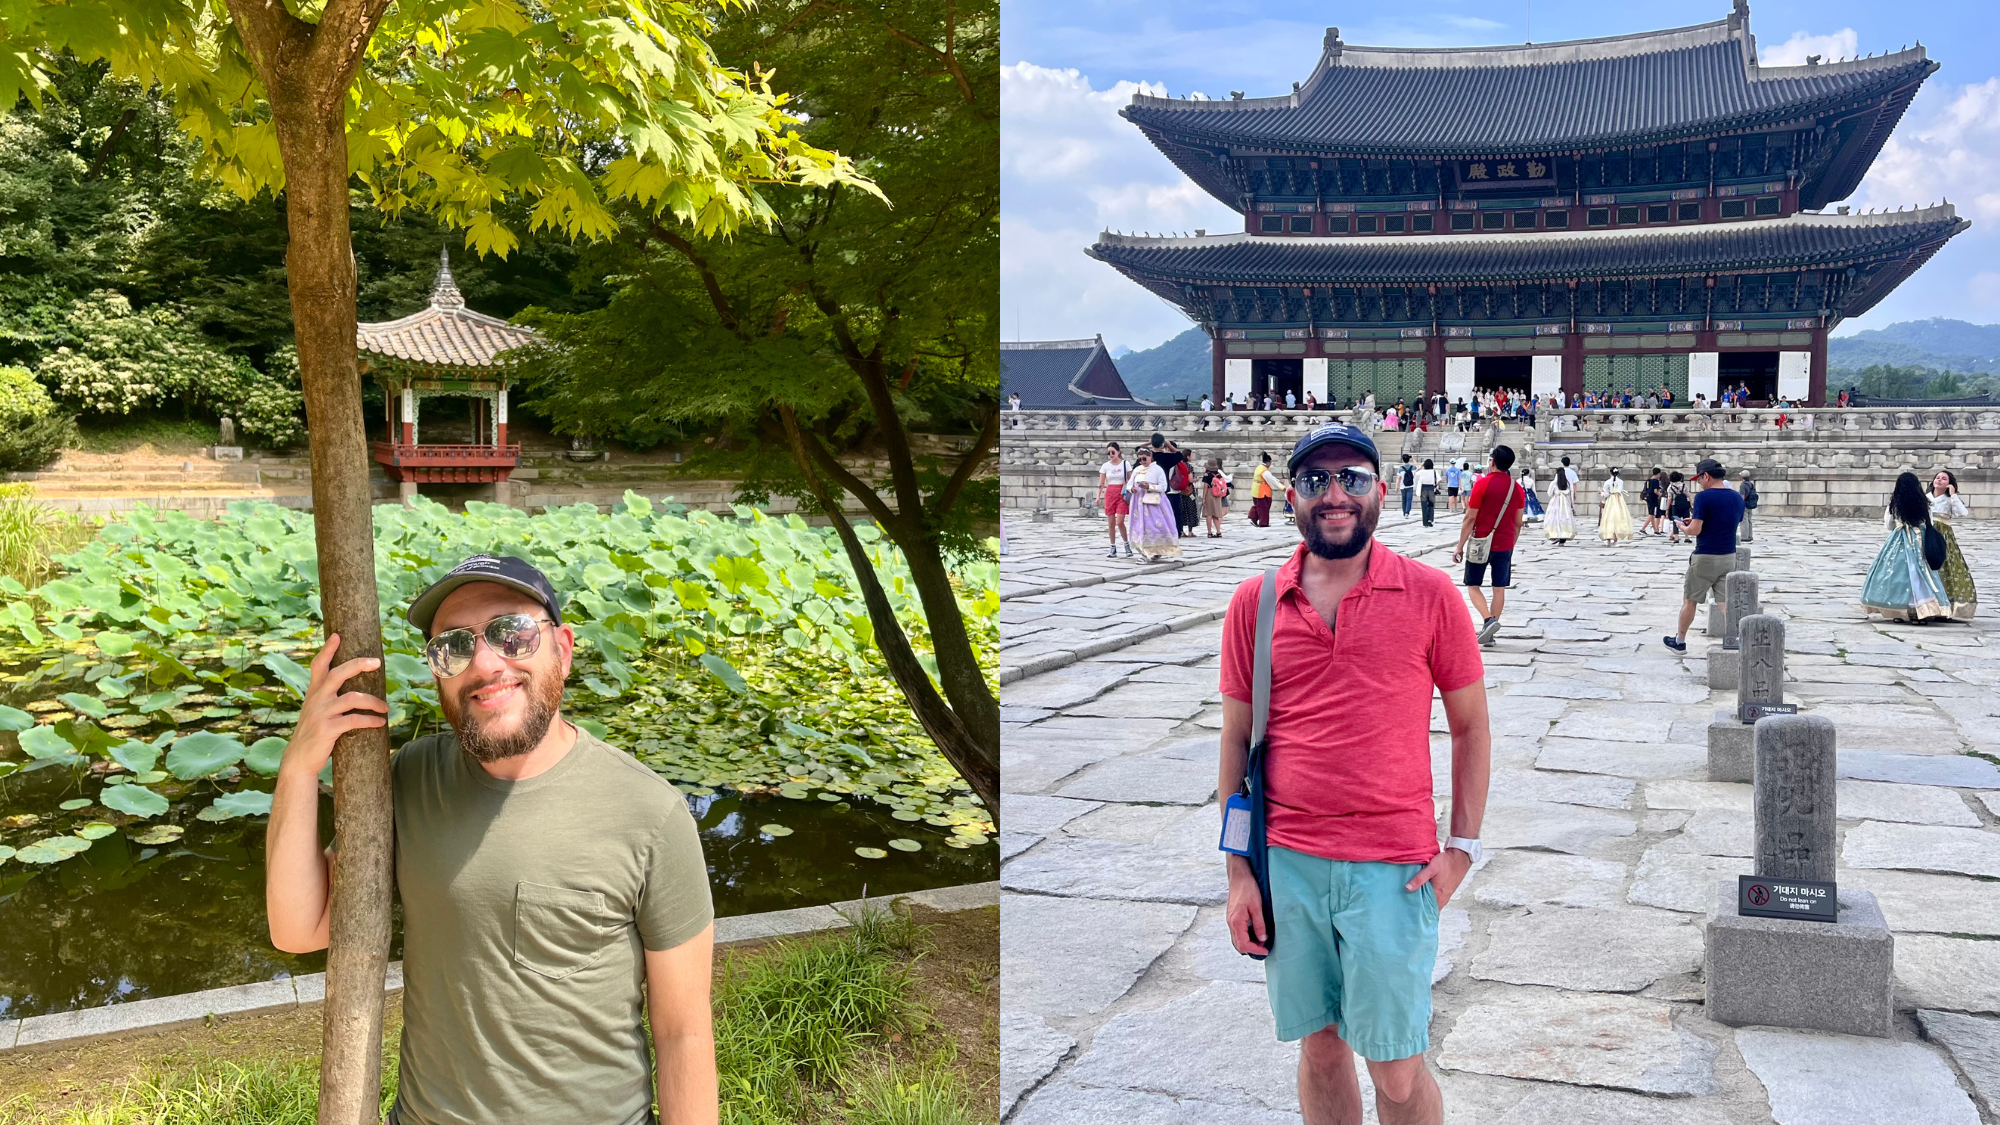 Albey Miner (EMBA'XX) recently traveled to South Korea as part of the Global Capstone Project at Georgetown McDonough